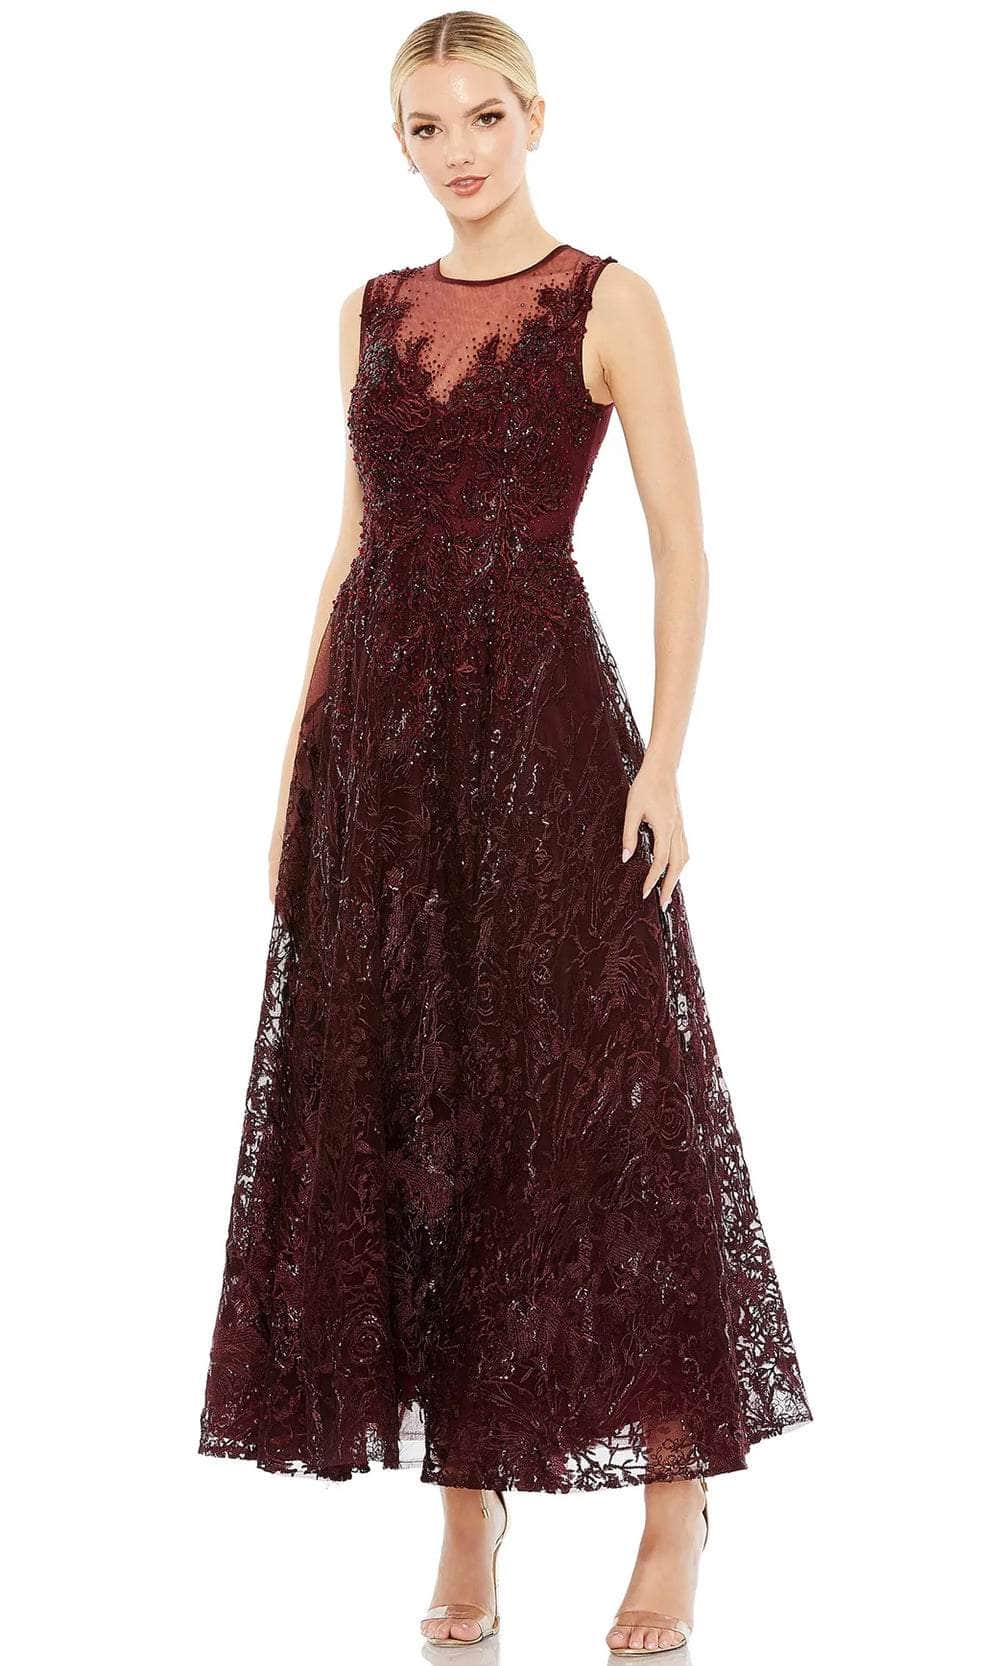 Image of Mac Duggal 20421 - Beaded Lace A-Line Evening Dress